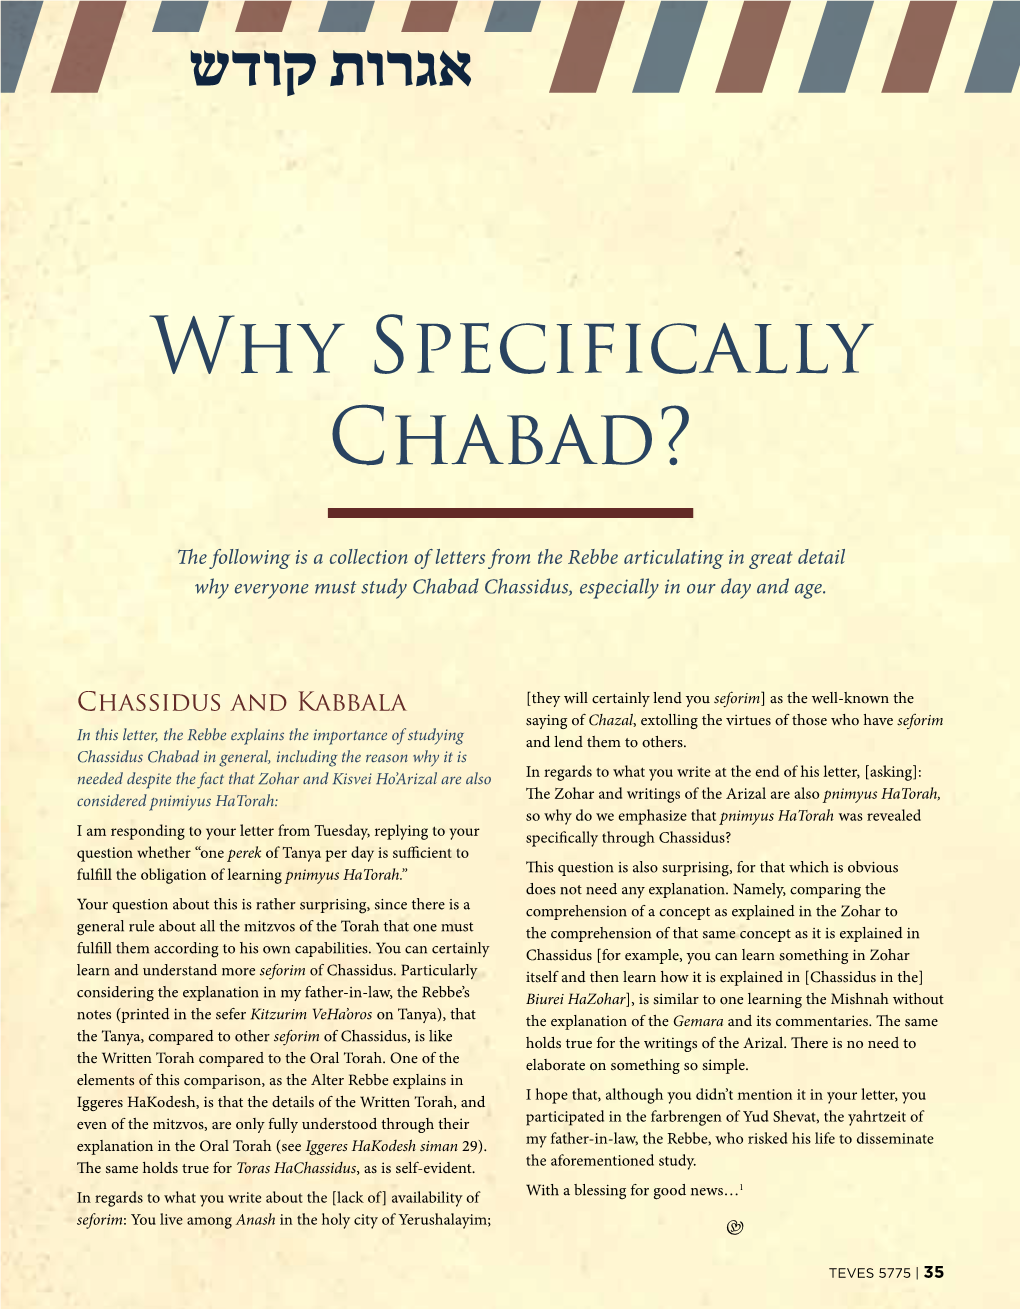 Why Specifically Chabad?